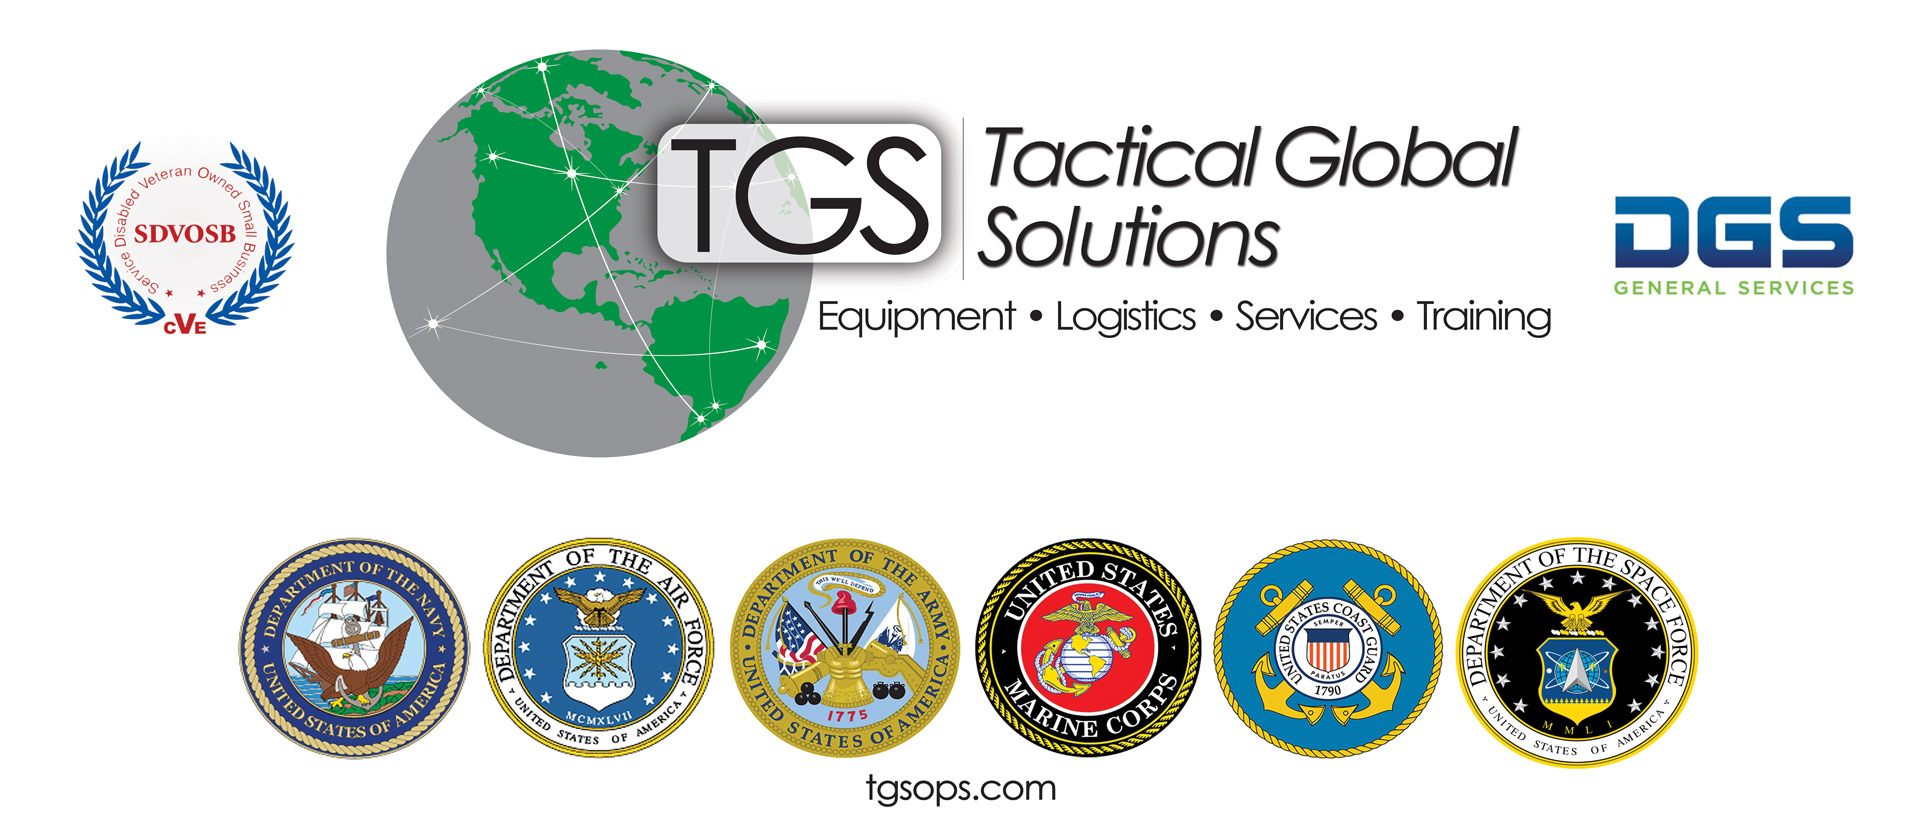 Tactical Global Solutions